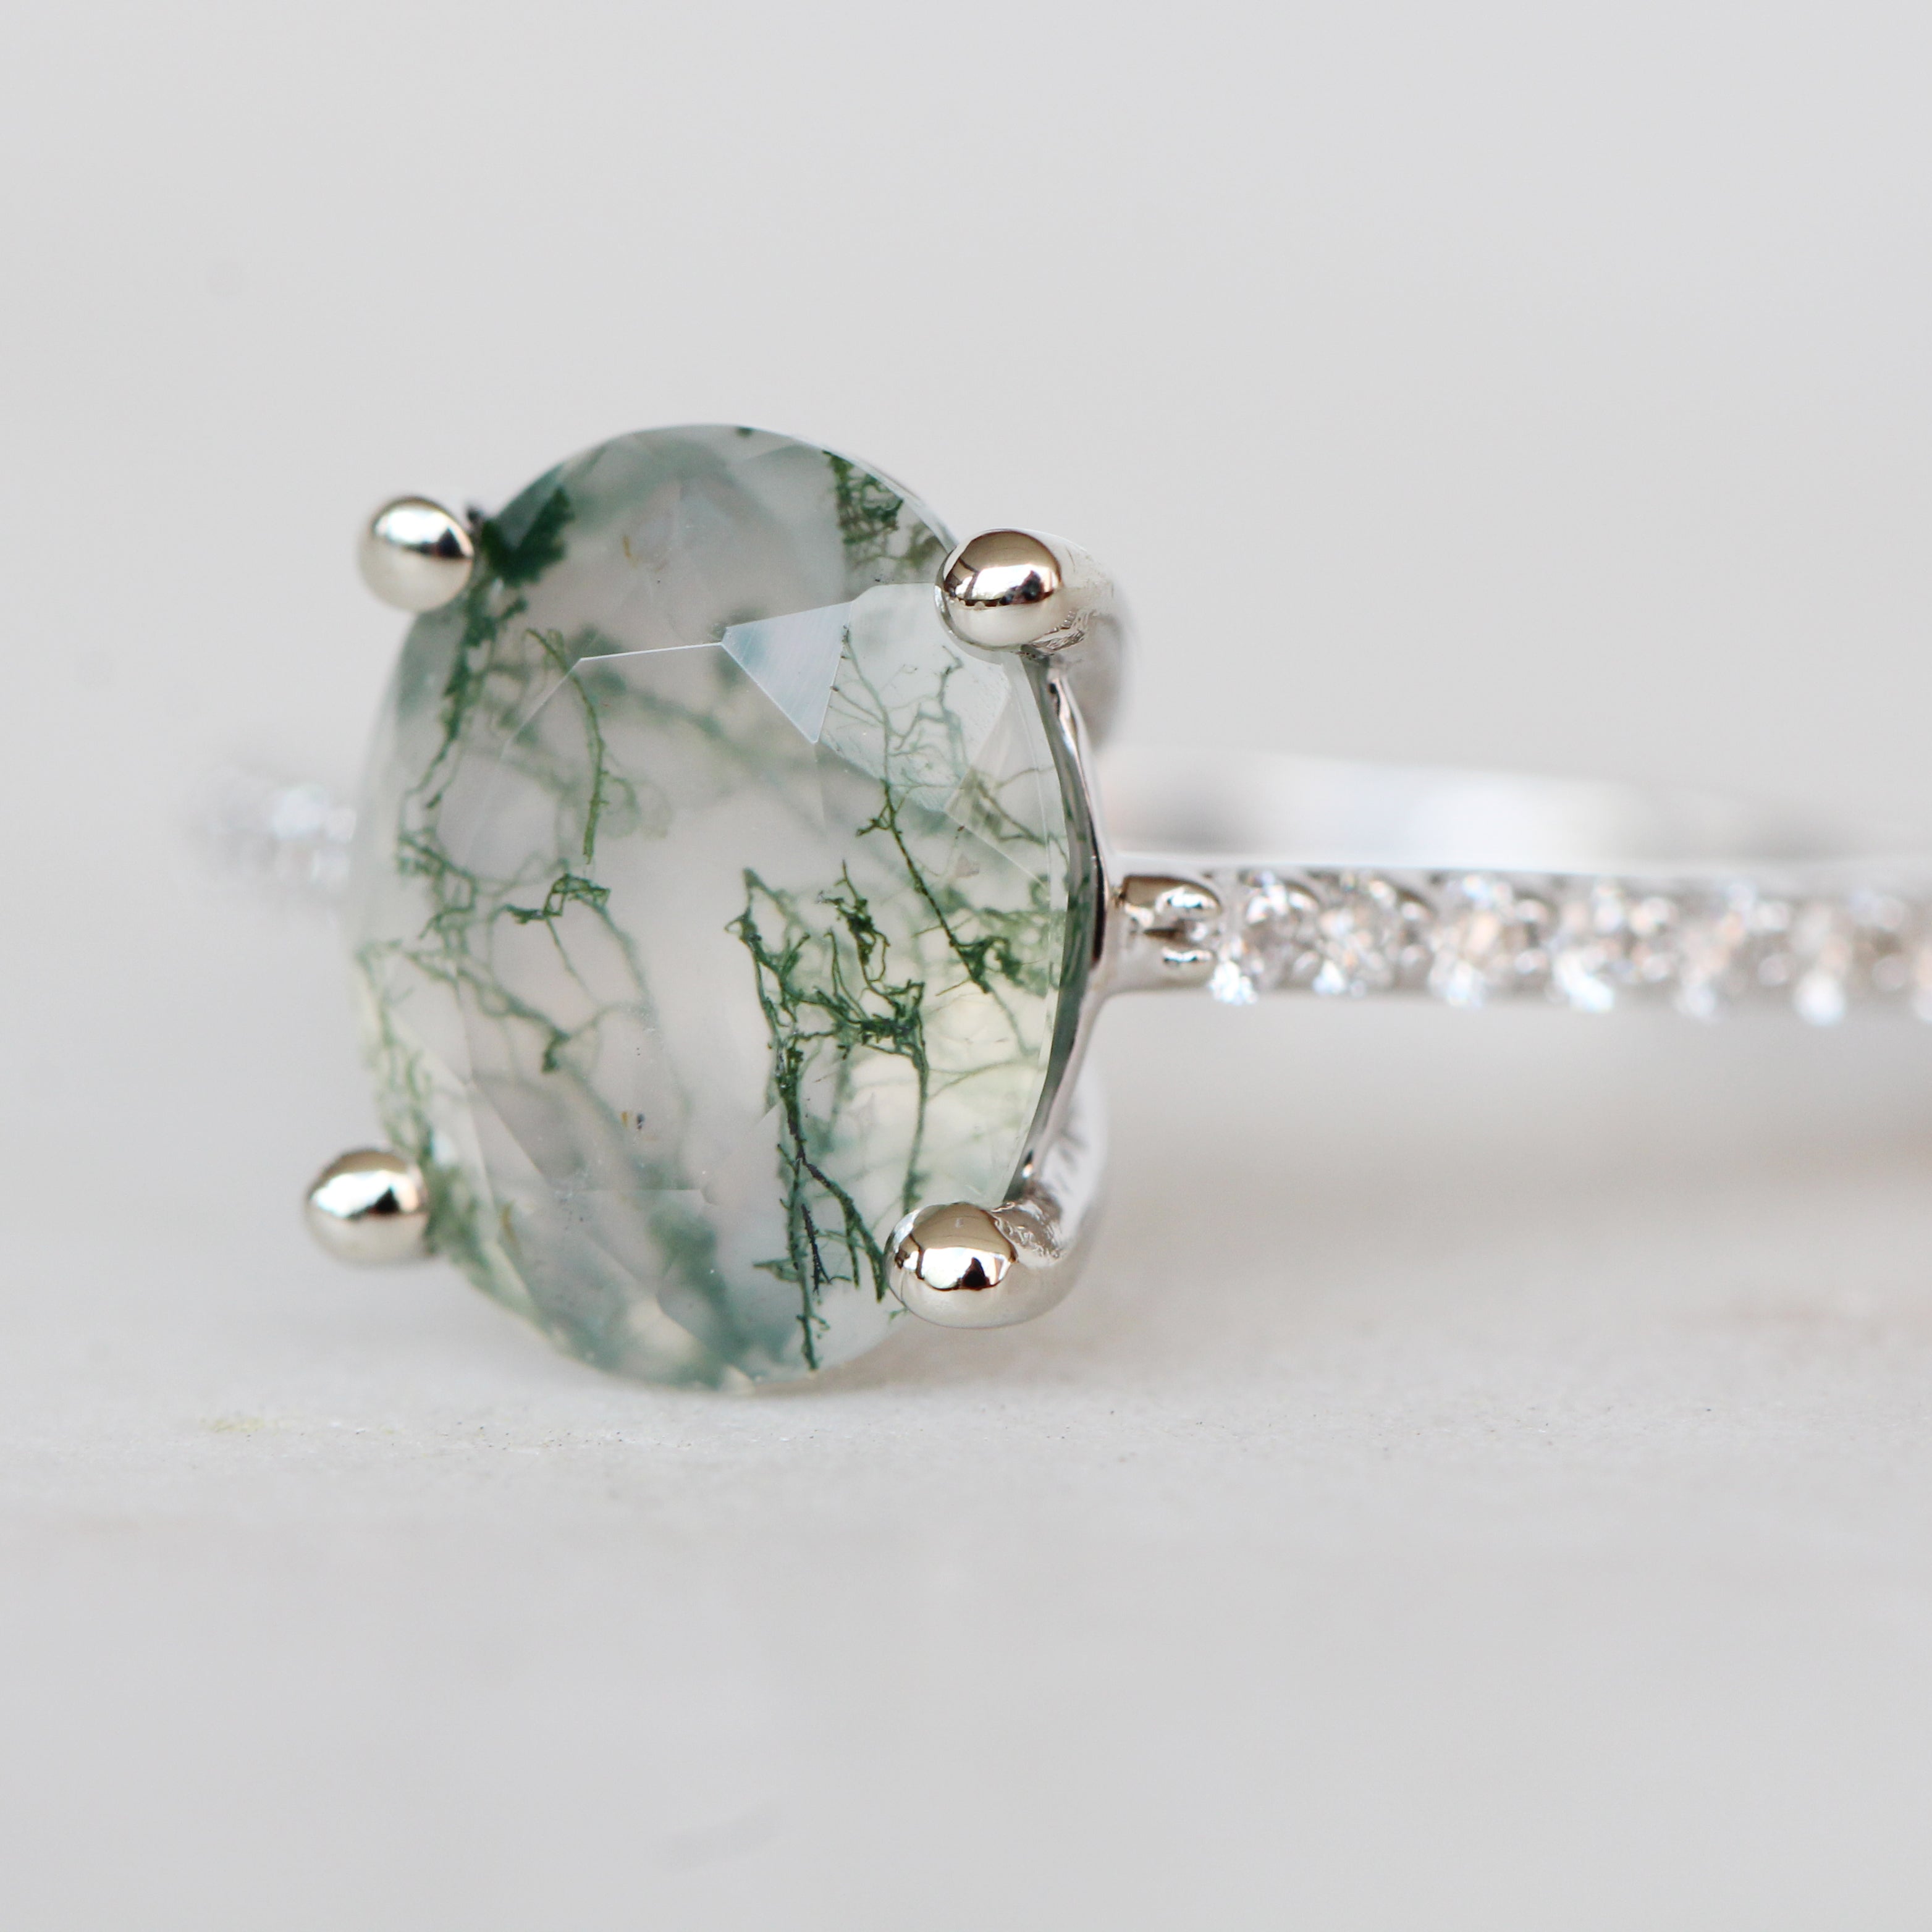 Raine Ring with a 2.06 Carat Moss Agate and Accent Diamonds in 14k White Gold - Ready to size and ship - Midwinter Co. Alternative Bridal Rings and Modern Fine Jewelry